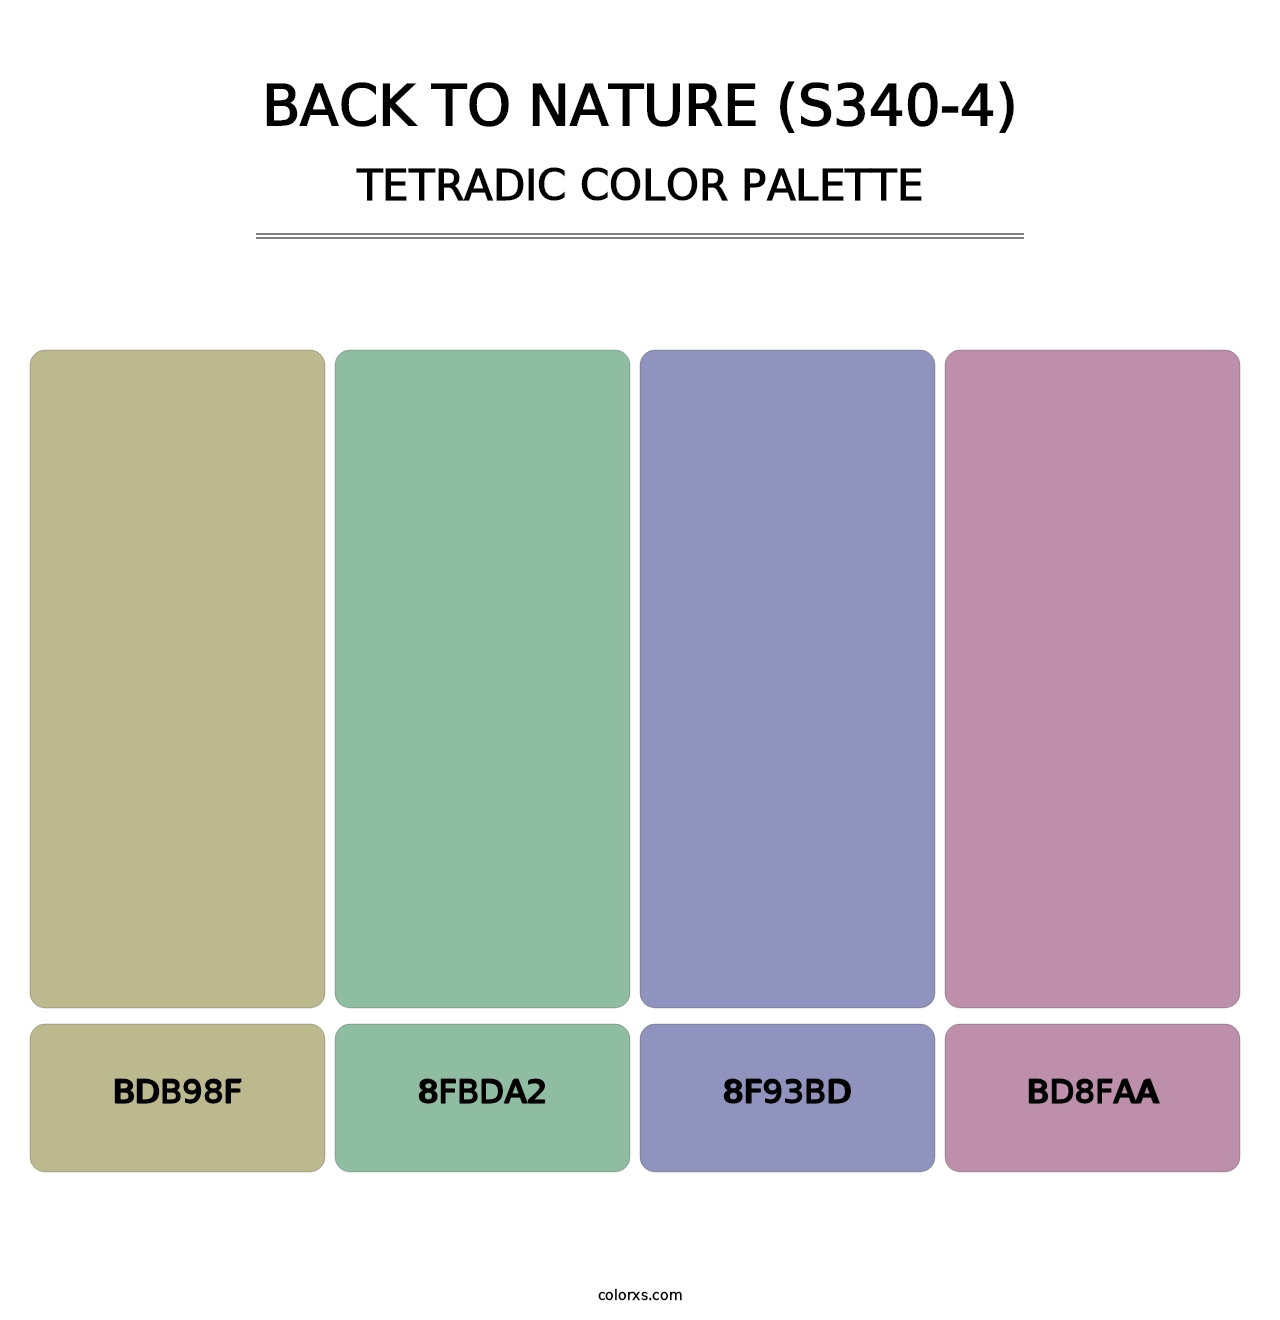 Back To Nature (S340-4) - Tetradic Color Palette